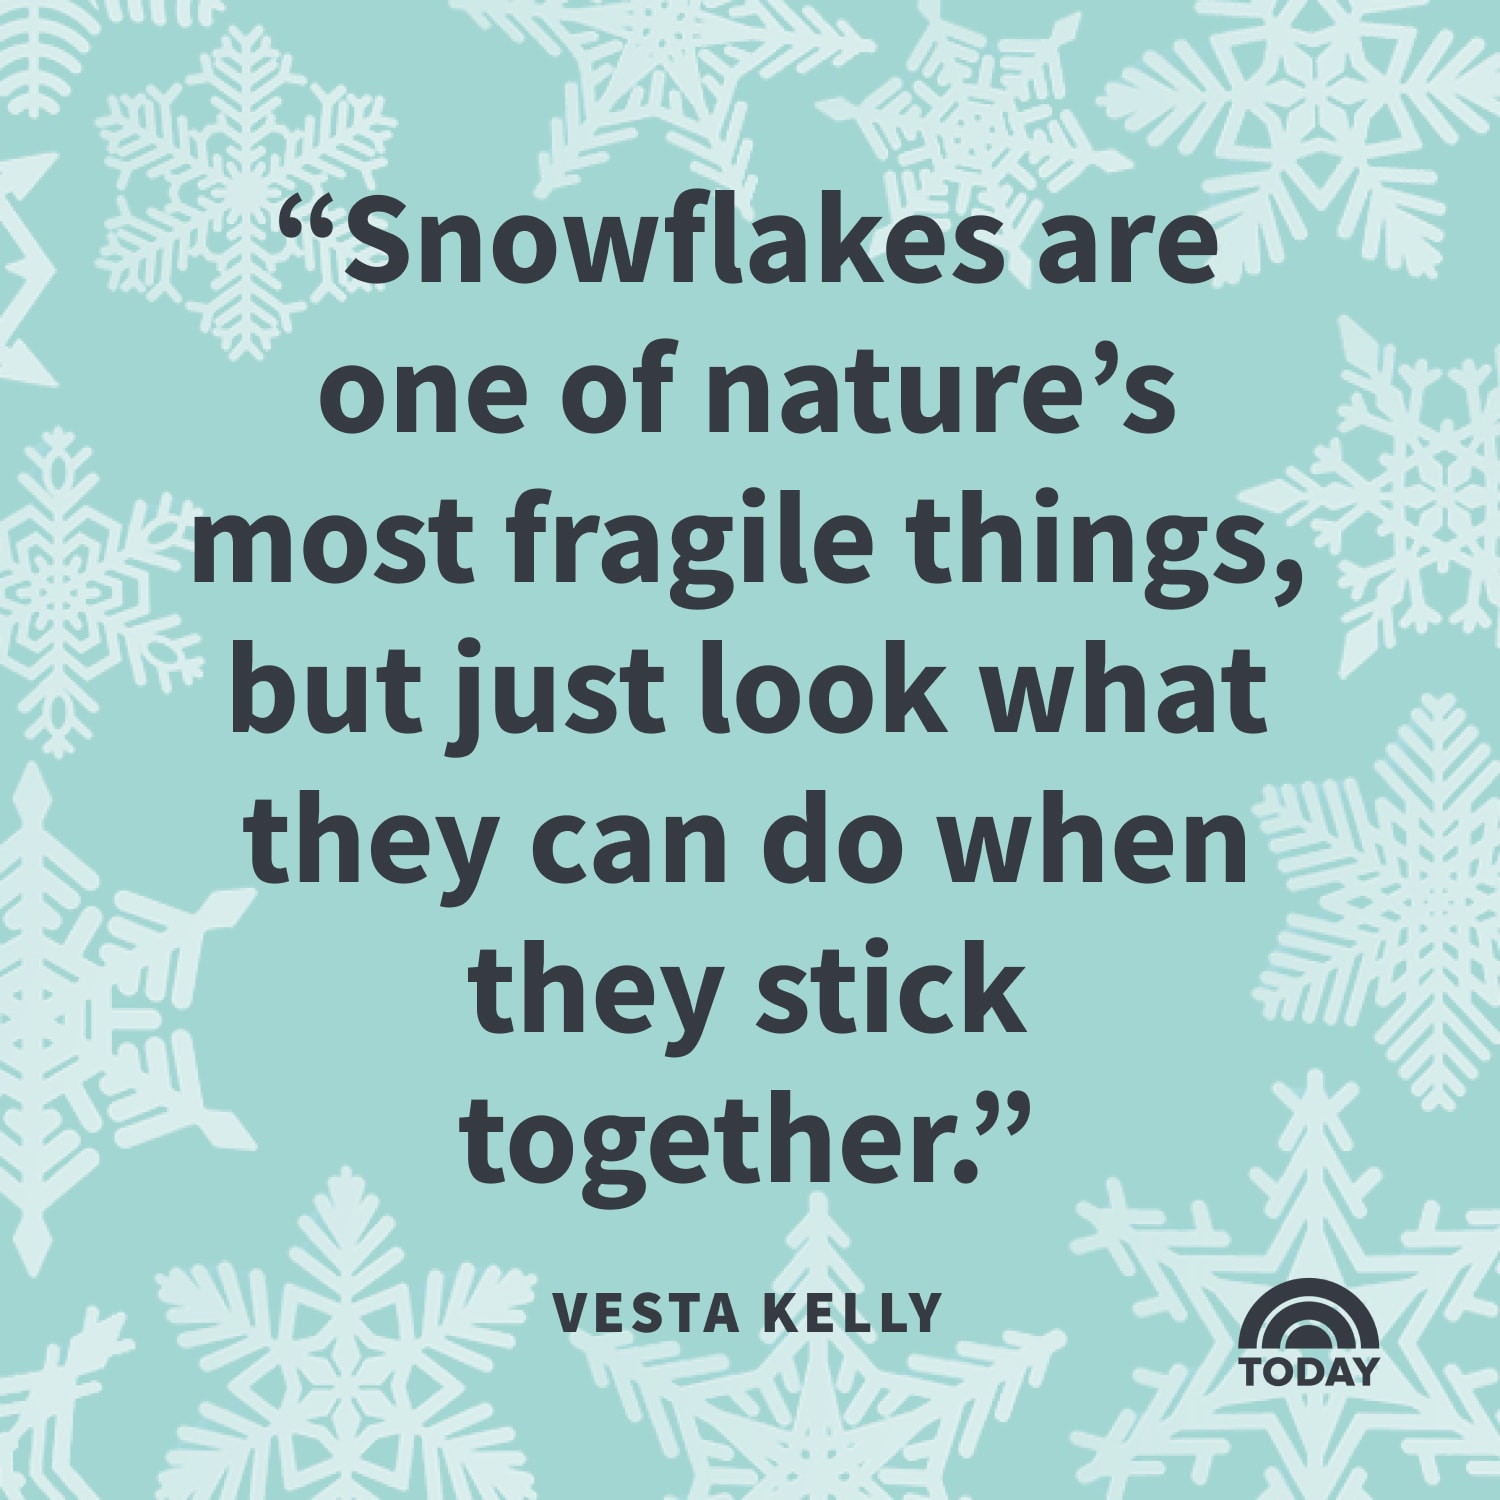 16 Best Quotes About Snow - Snowy Winter Quotes & Sayings